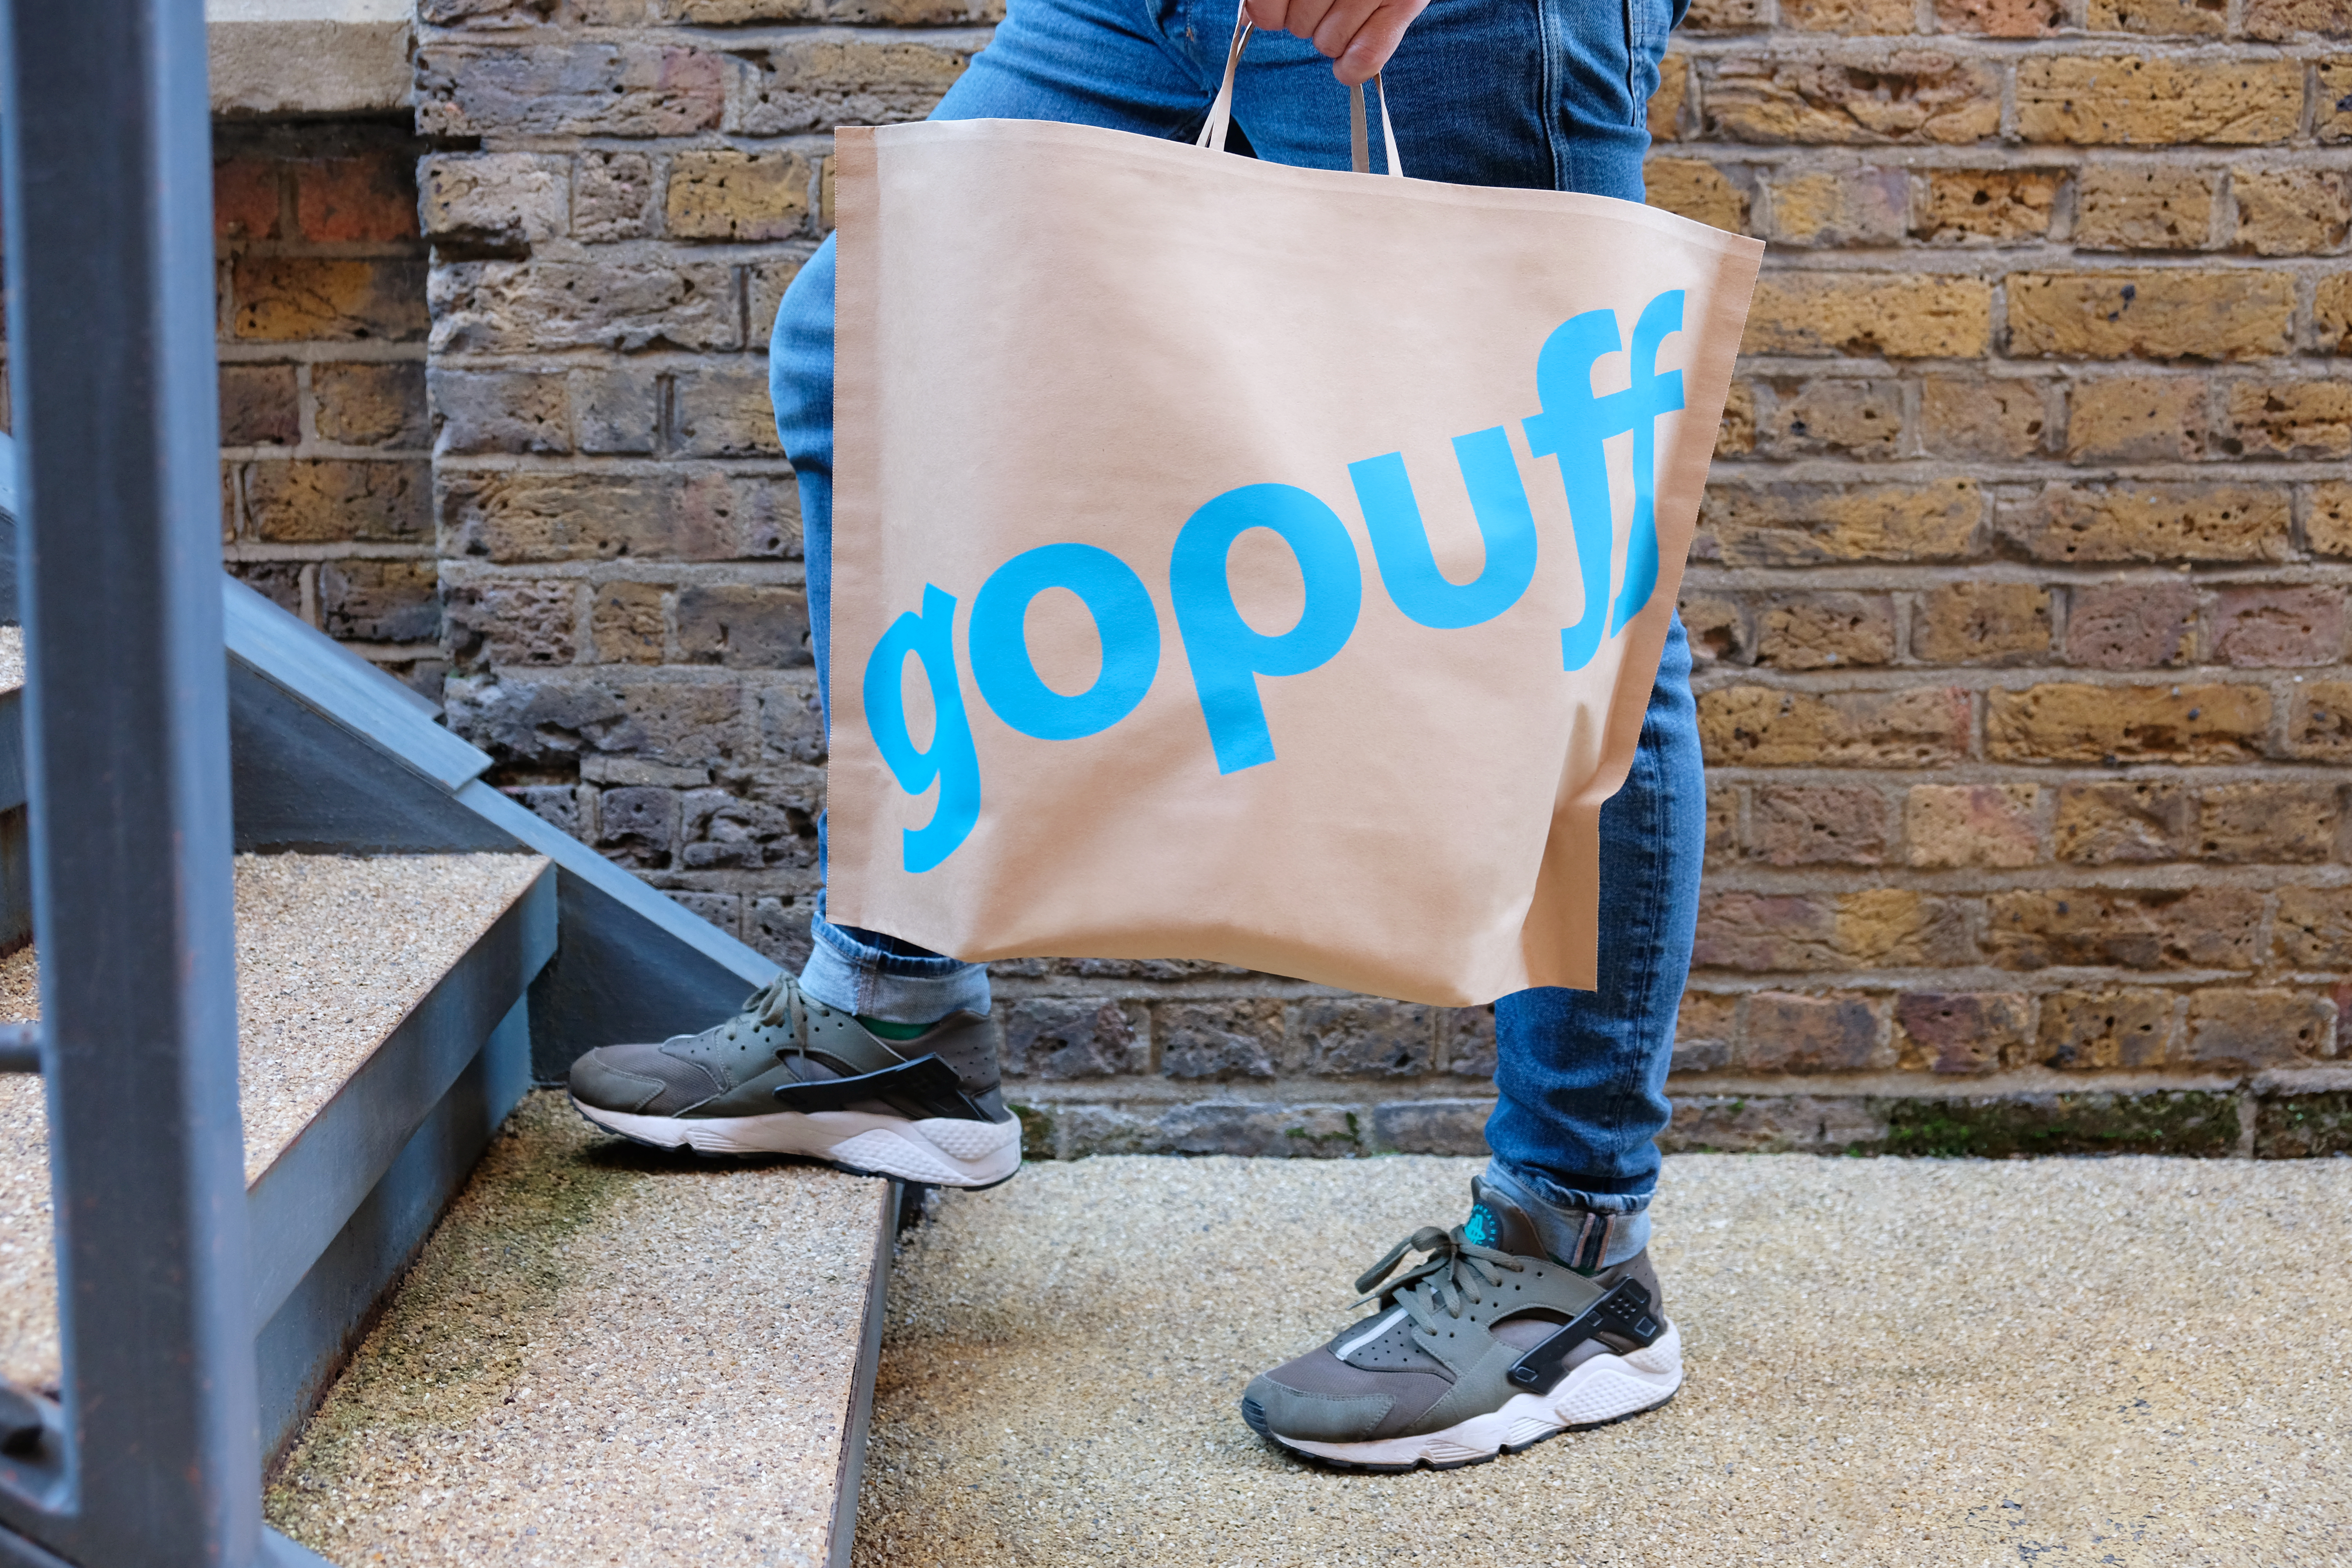 After acquiring Dija and Fancy, instant grocery startup Gopuff launches in the UK en route to European expansion